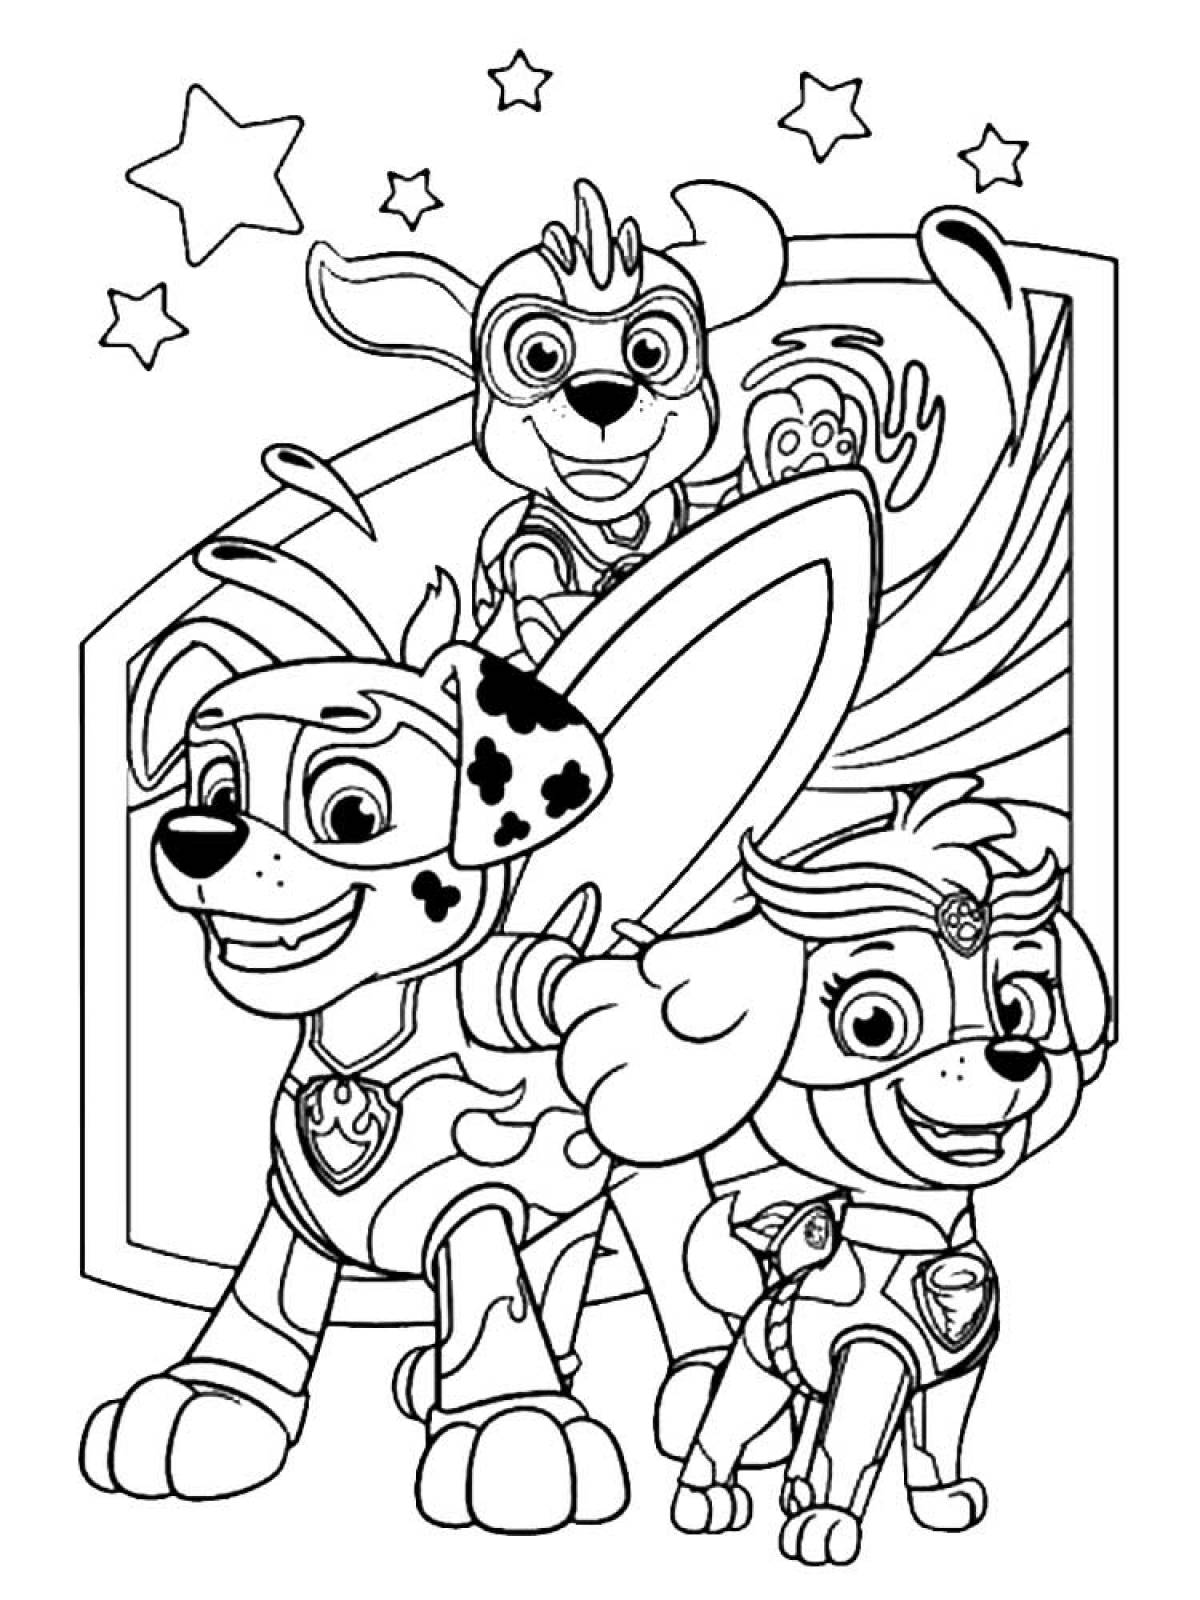 Mega puppies coloring pages